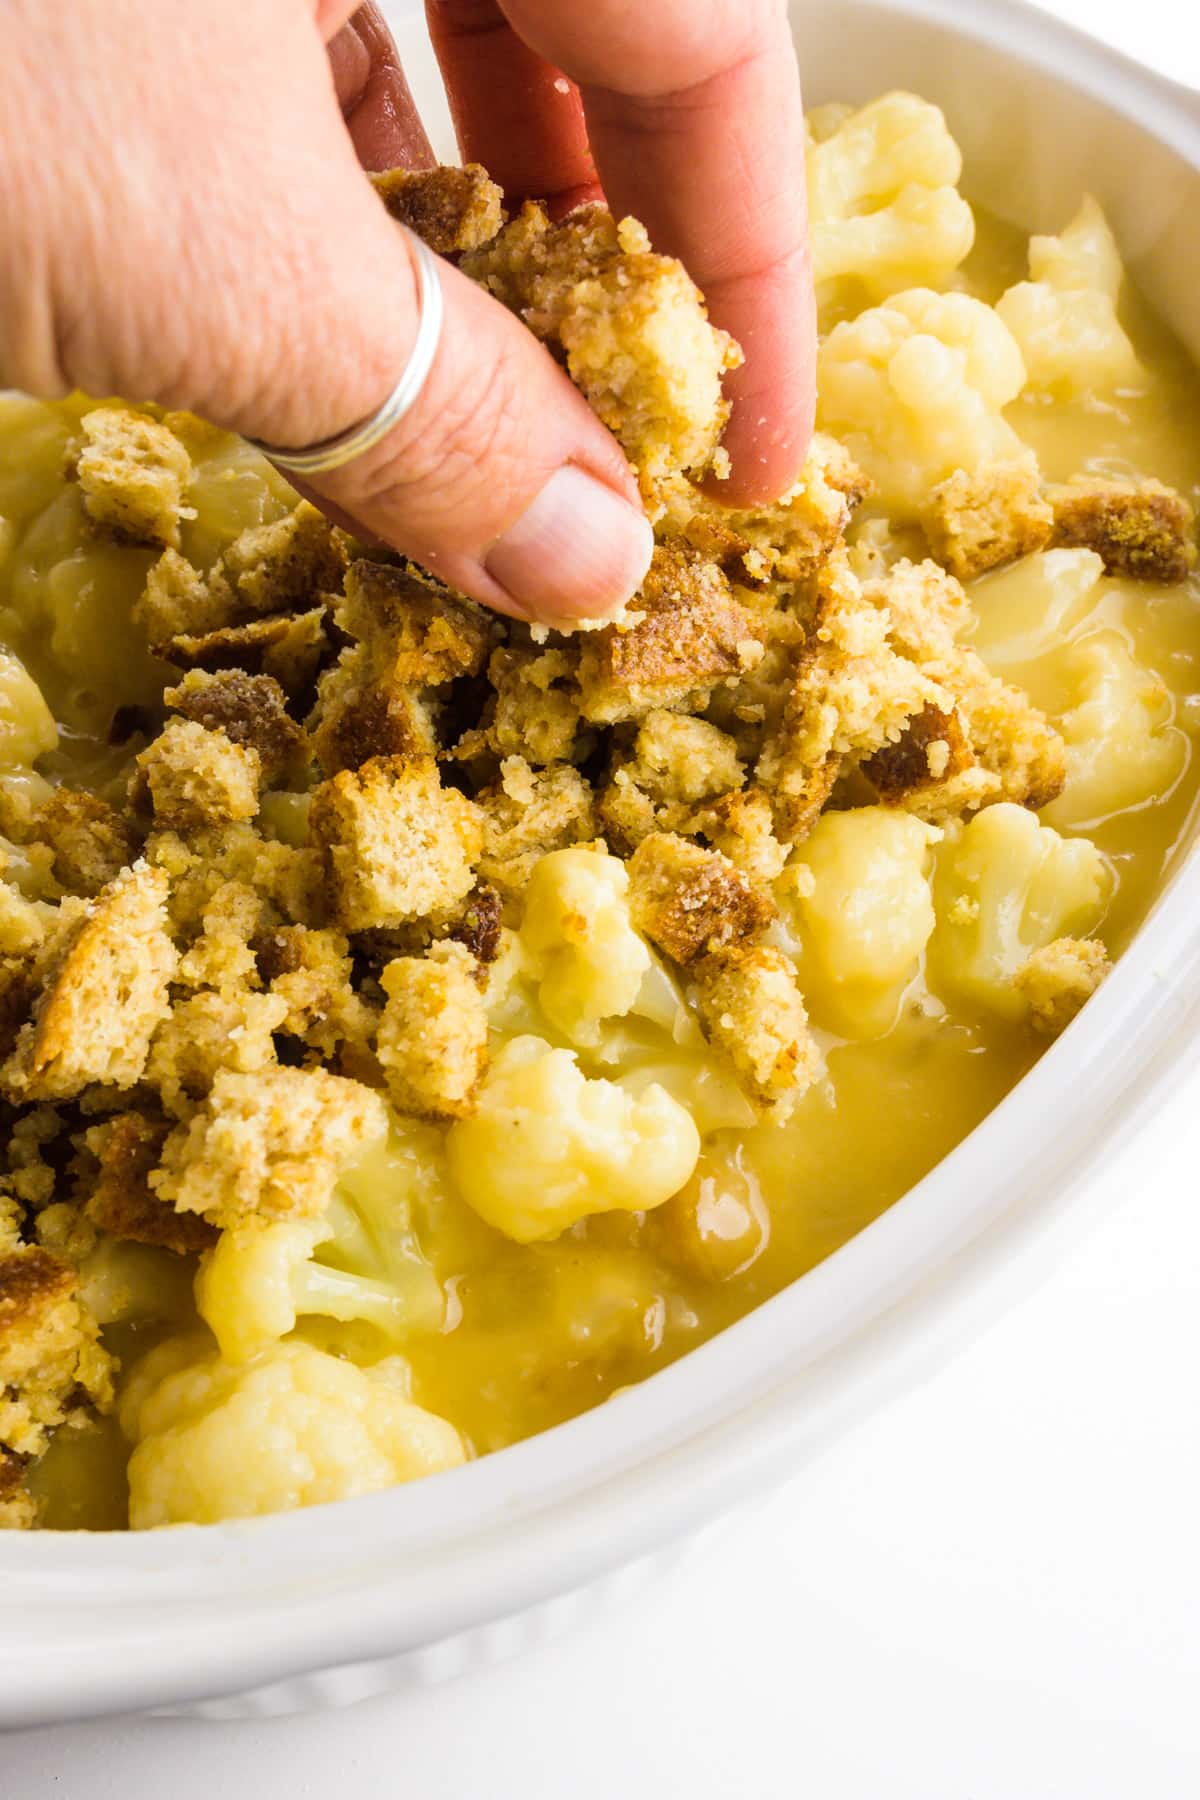 A hand holds bread crumbs and is dropping them over a cauliflower mixture in a casserole dish.